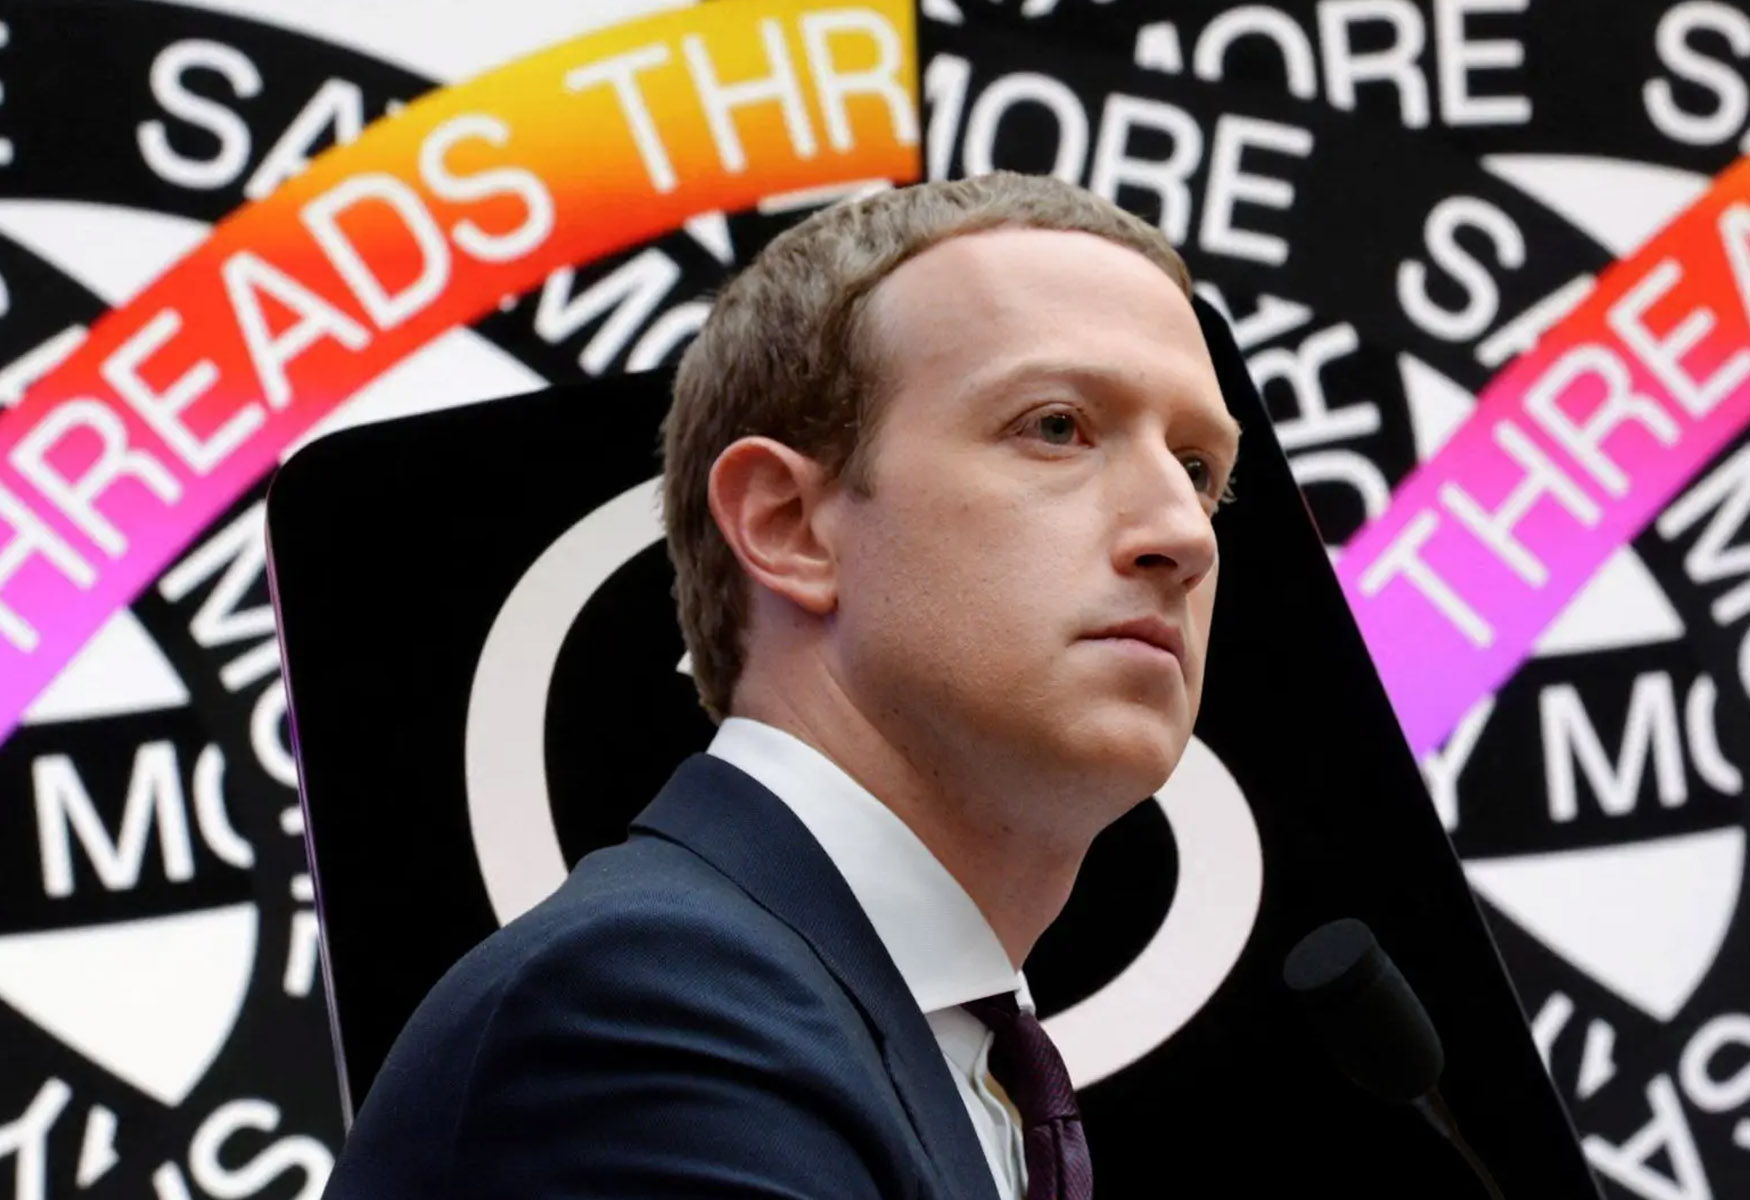 Zuckerberg Predicts Threads Could Reach 1 Billion Users In The Coming Years